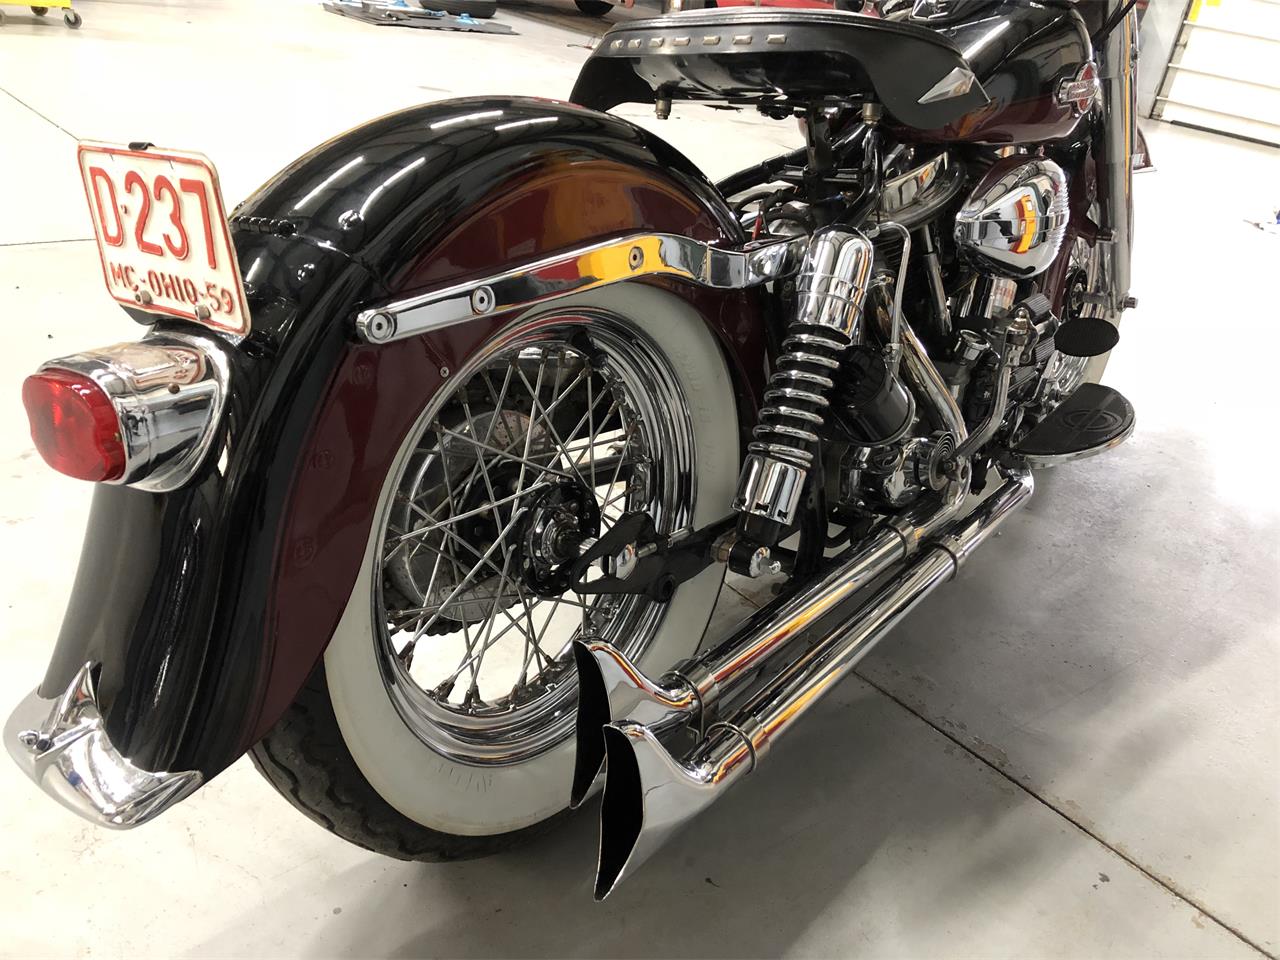 1959 Harley-Davidson Motorcycle for Sale | ClassicCars.com ...